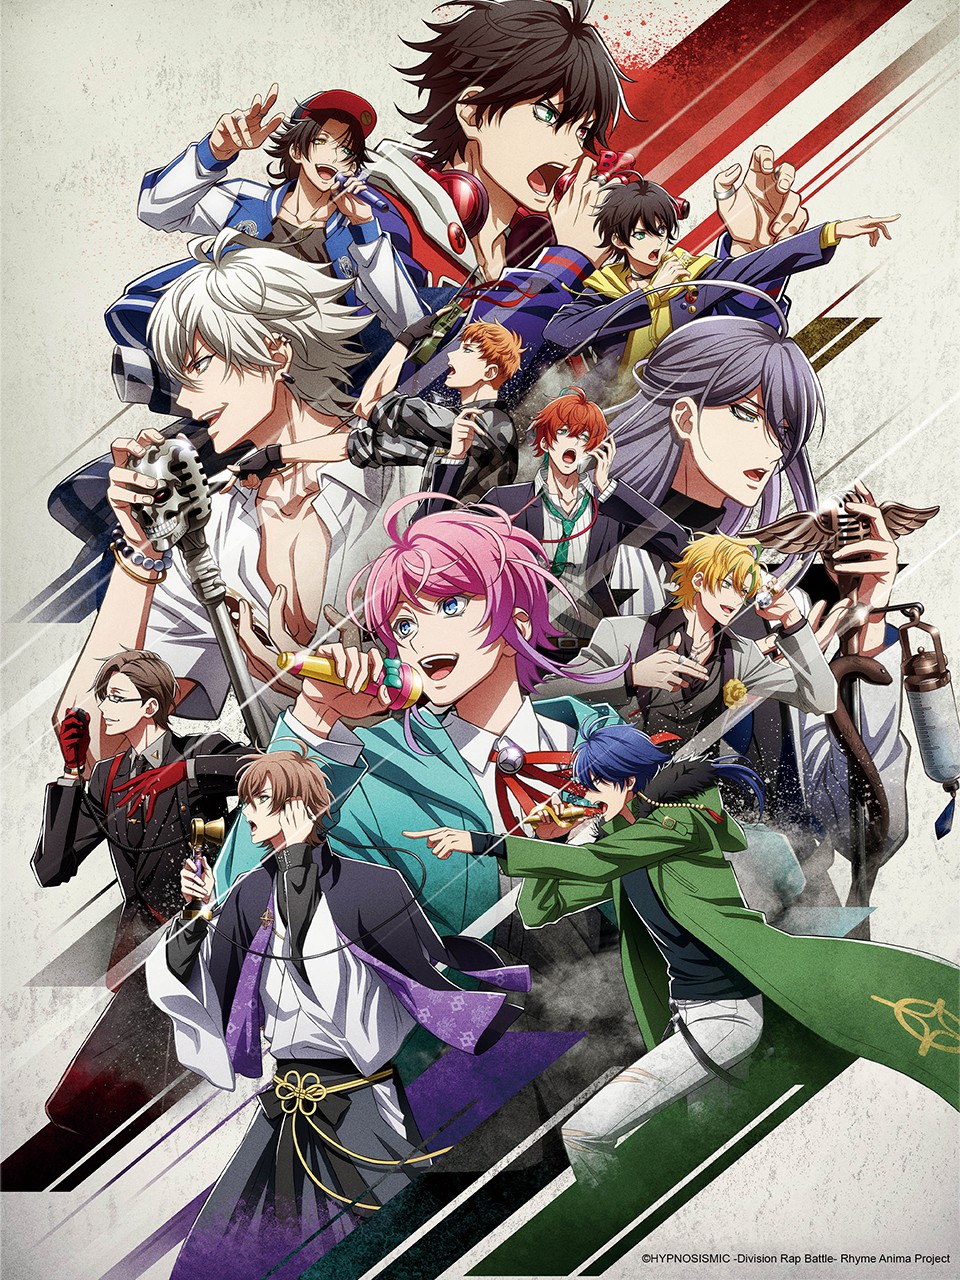 Hypnosis Mic Division Rap Battle side DH  BAT Manga Launches New  Series  News  Anime News Network